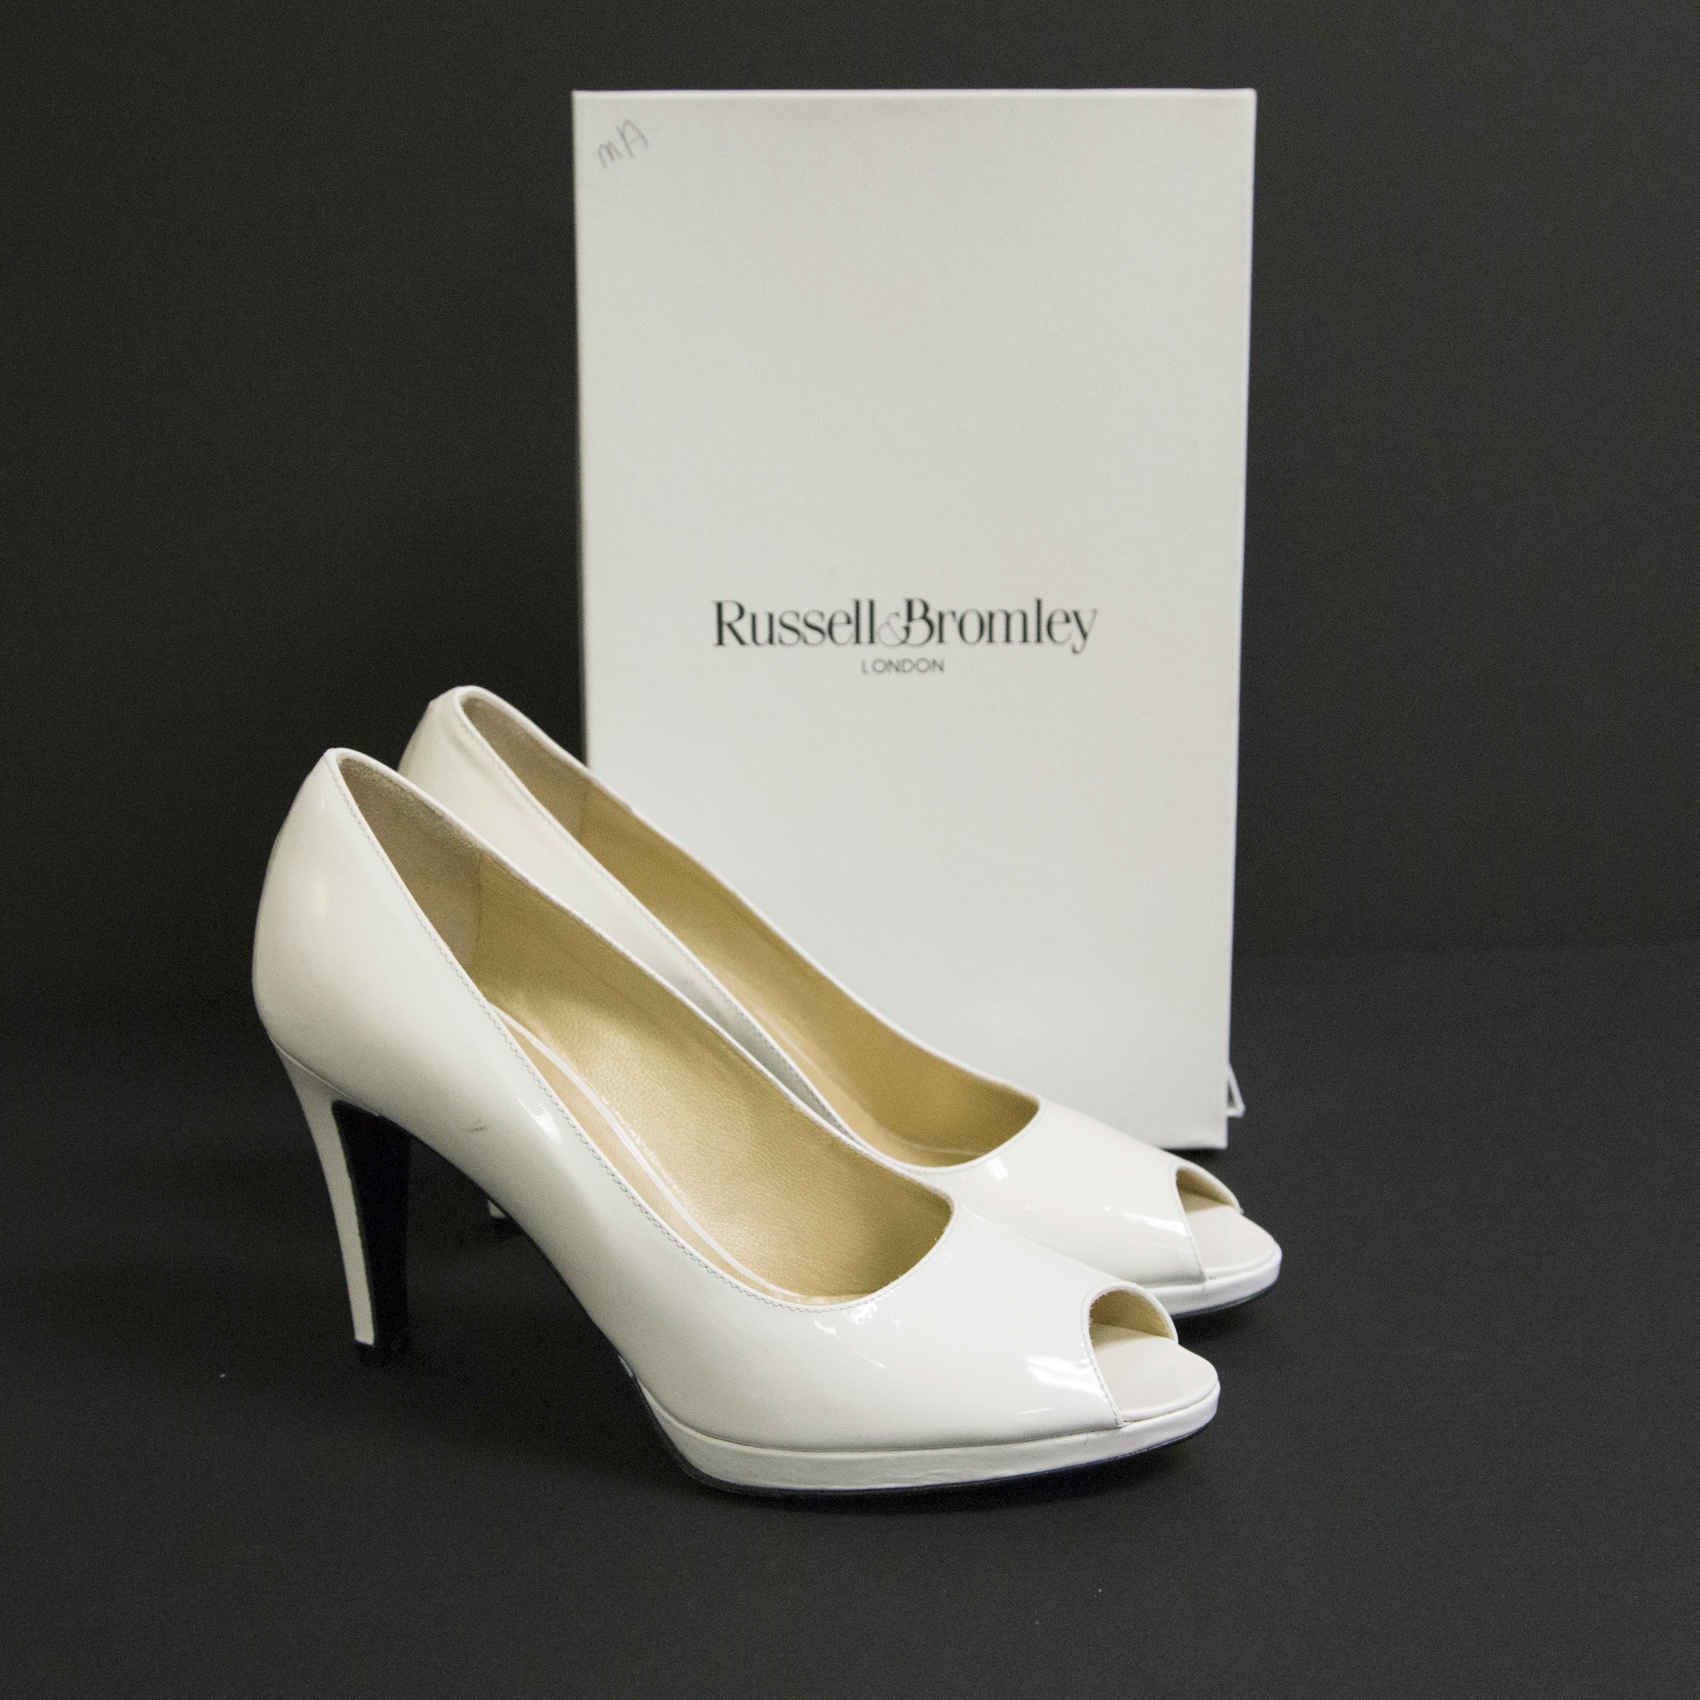 russell and bromley heels